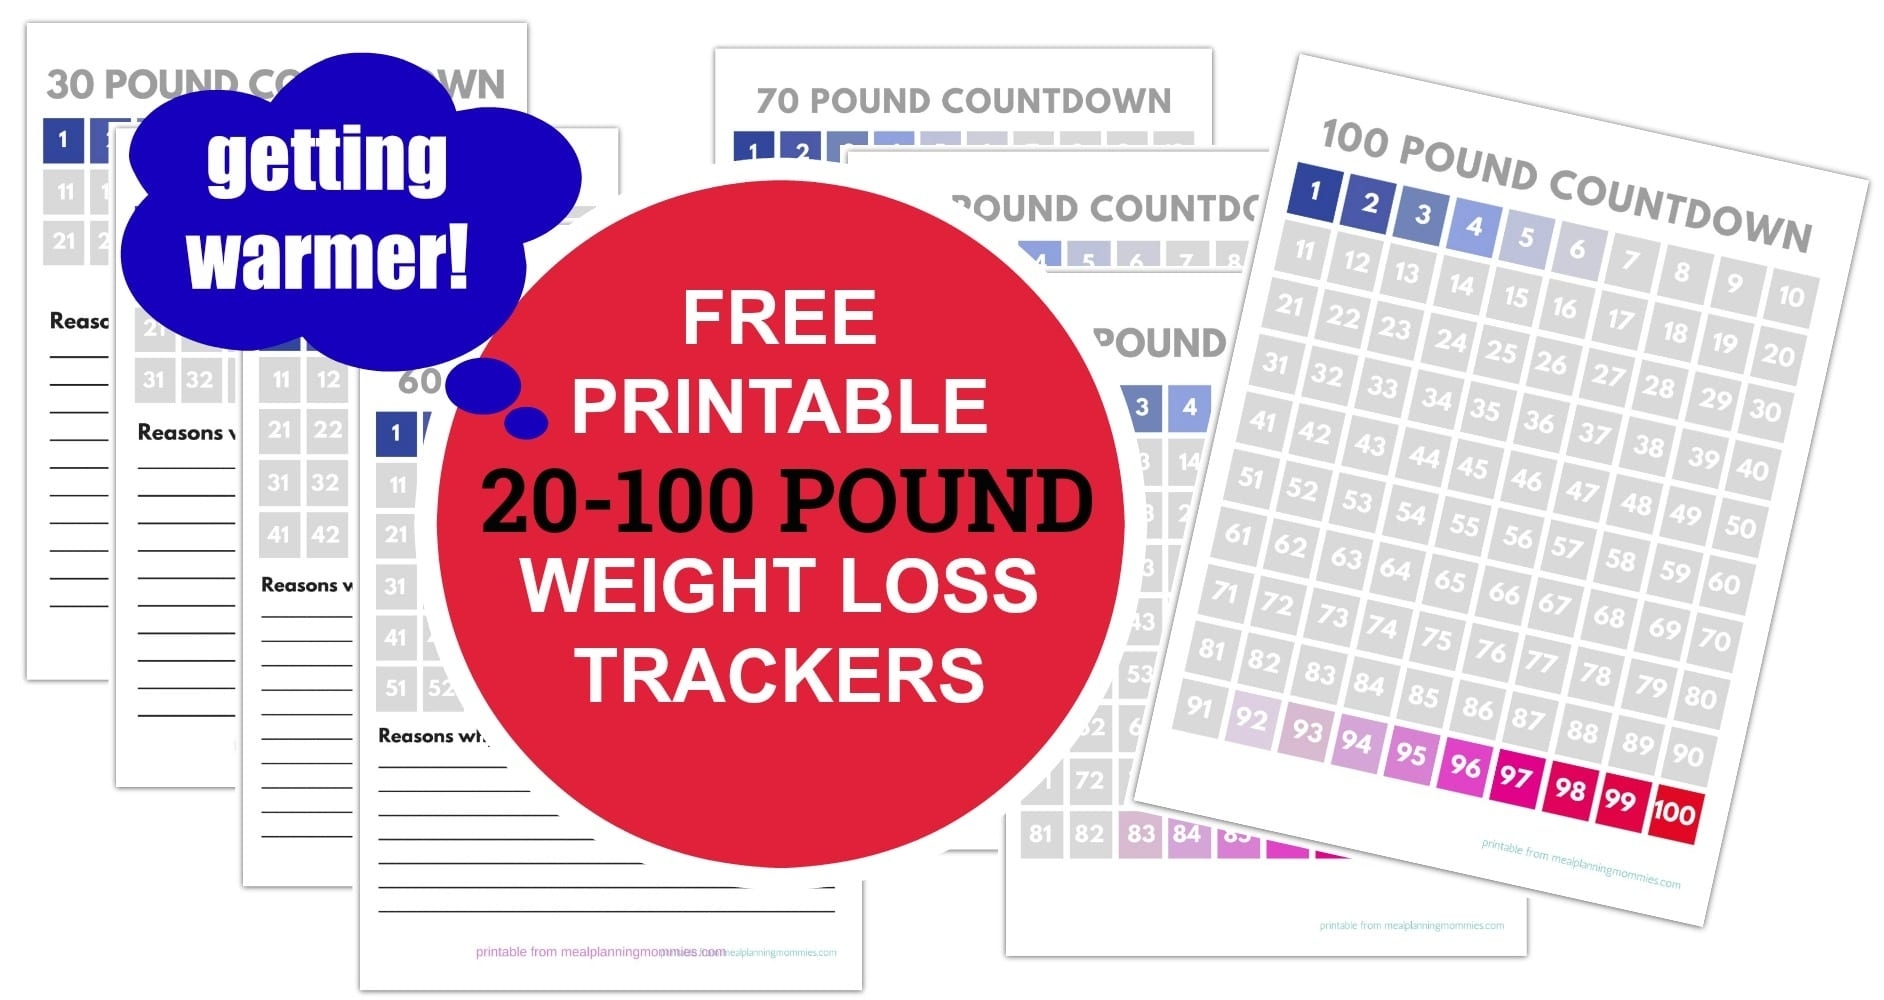 Free Printable 20-100 Pound Weight Loss Trackers - Meal Printable Weight Loss Countdown Chart